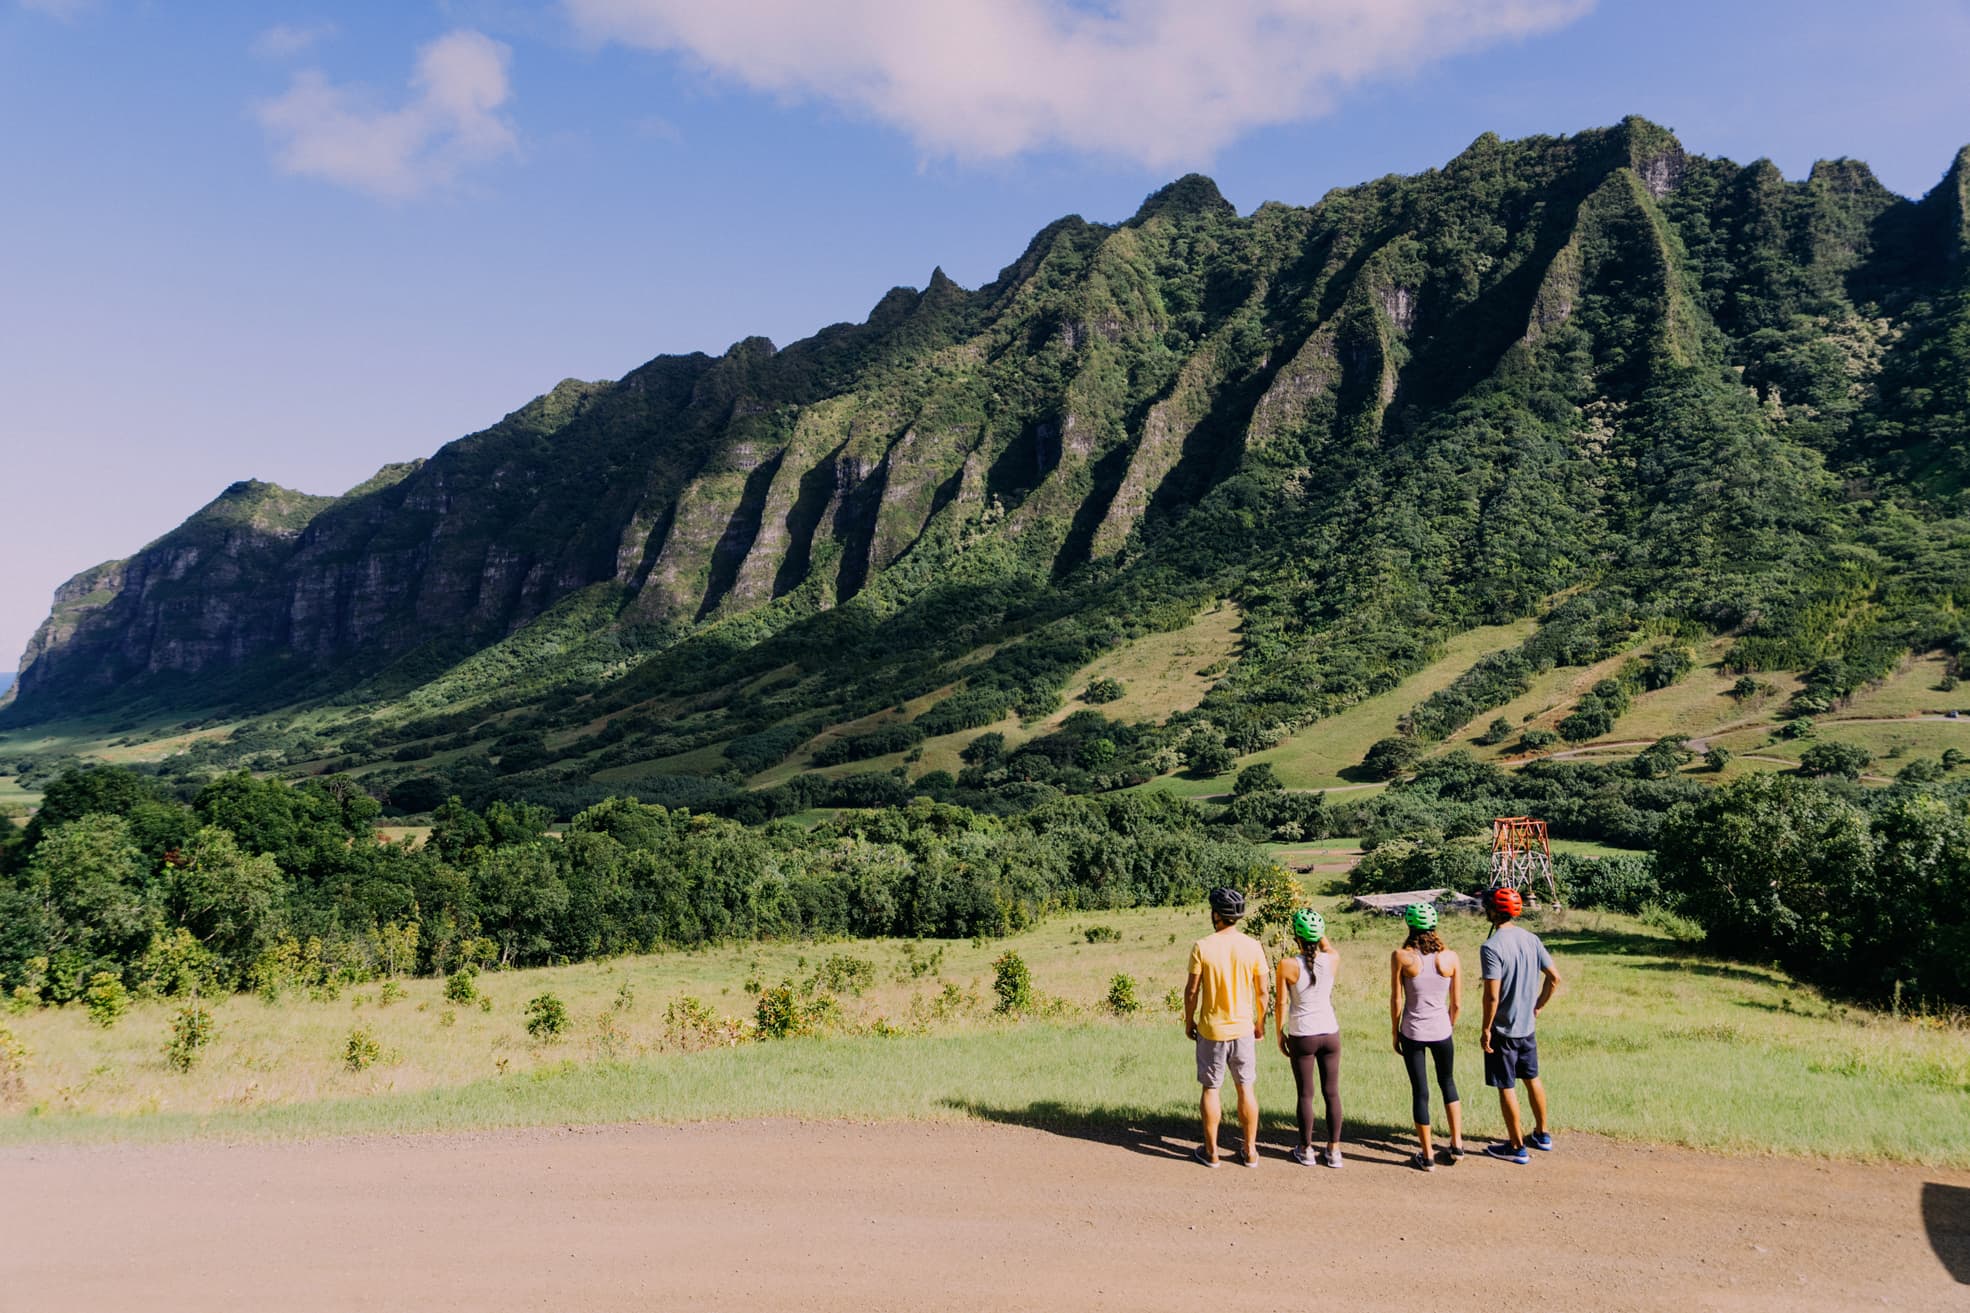 Plan a Dream Vacation to Hawaii This Spring